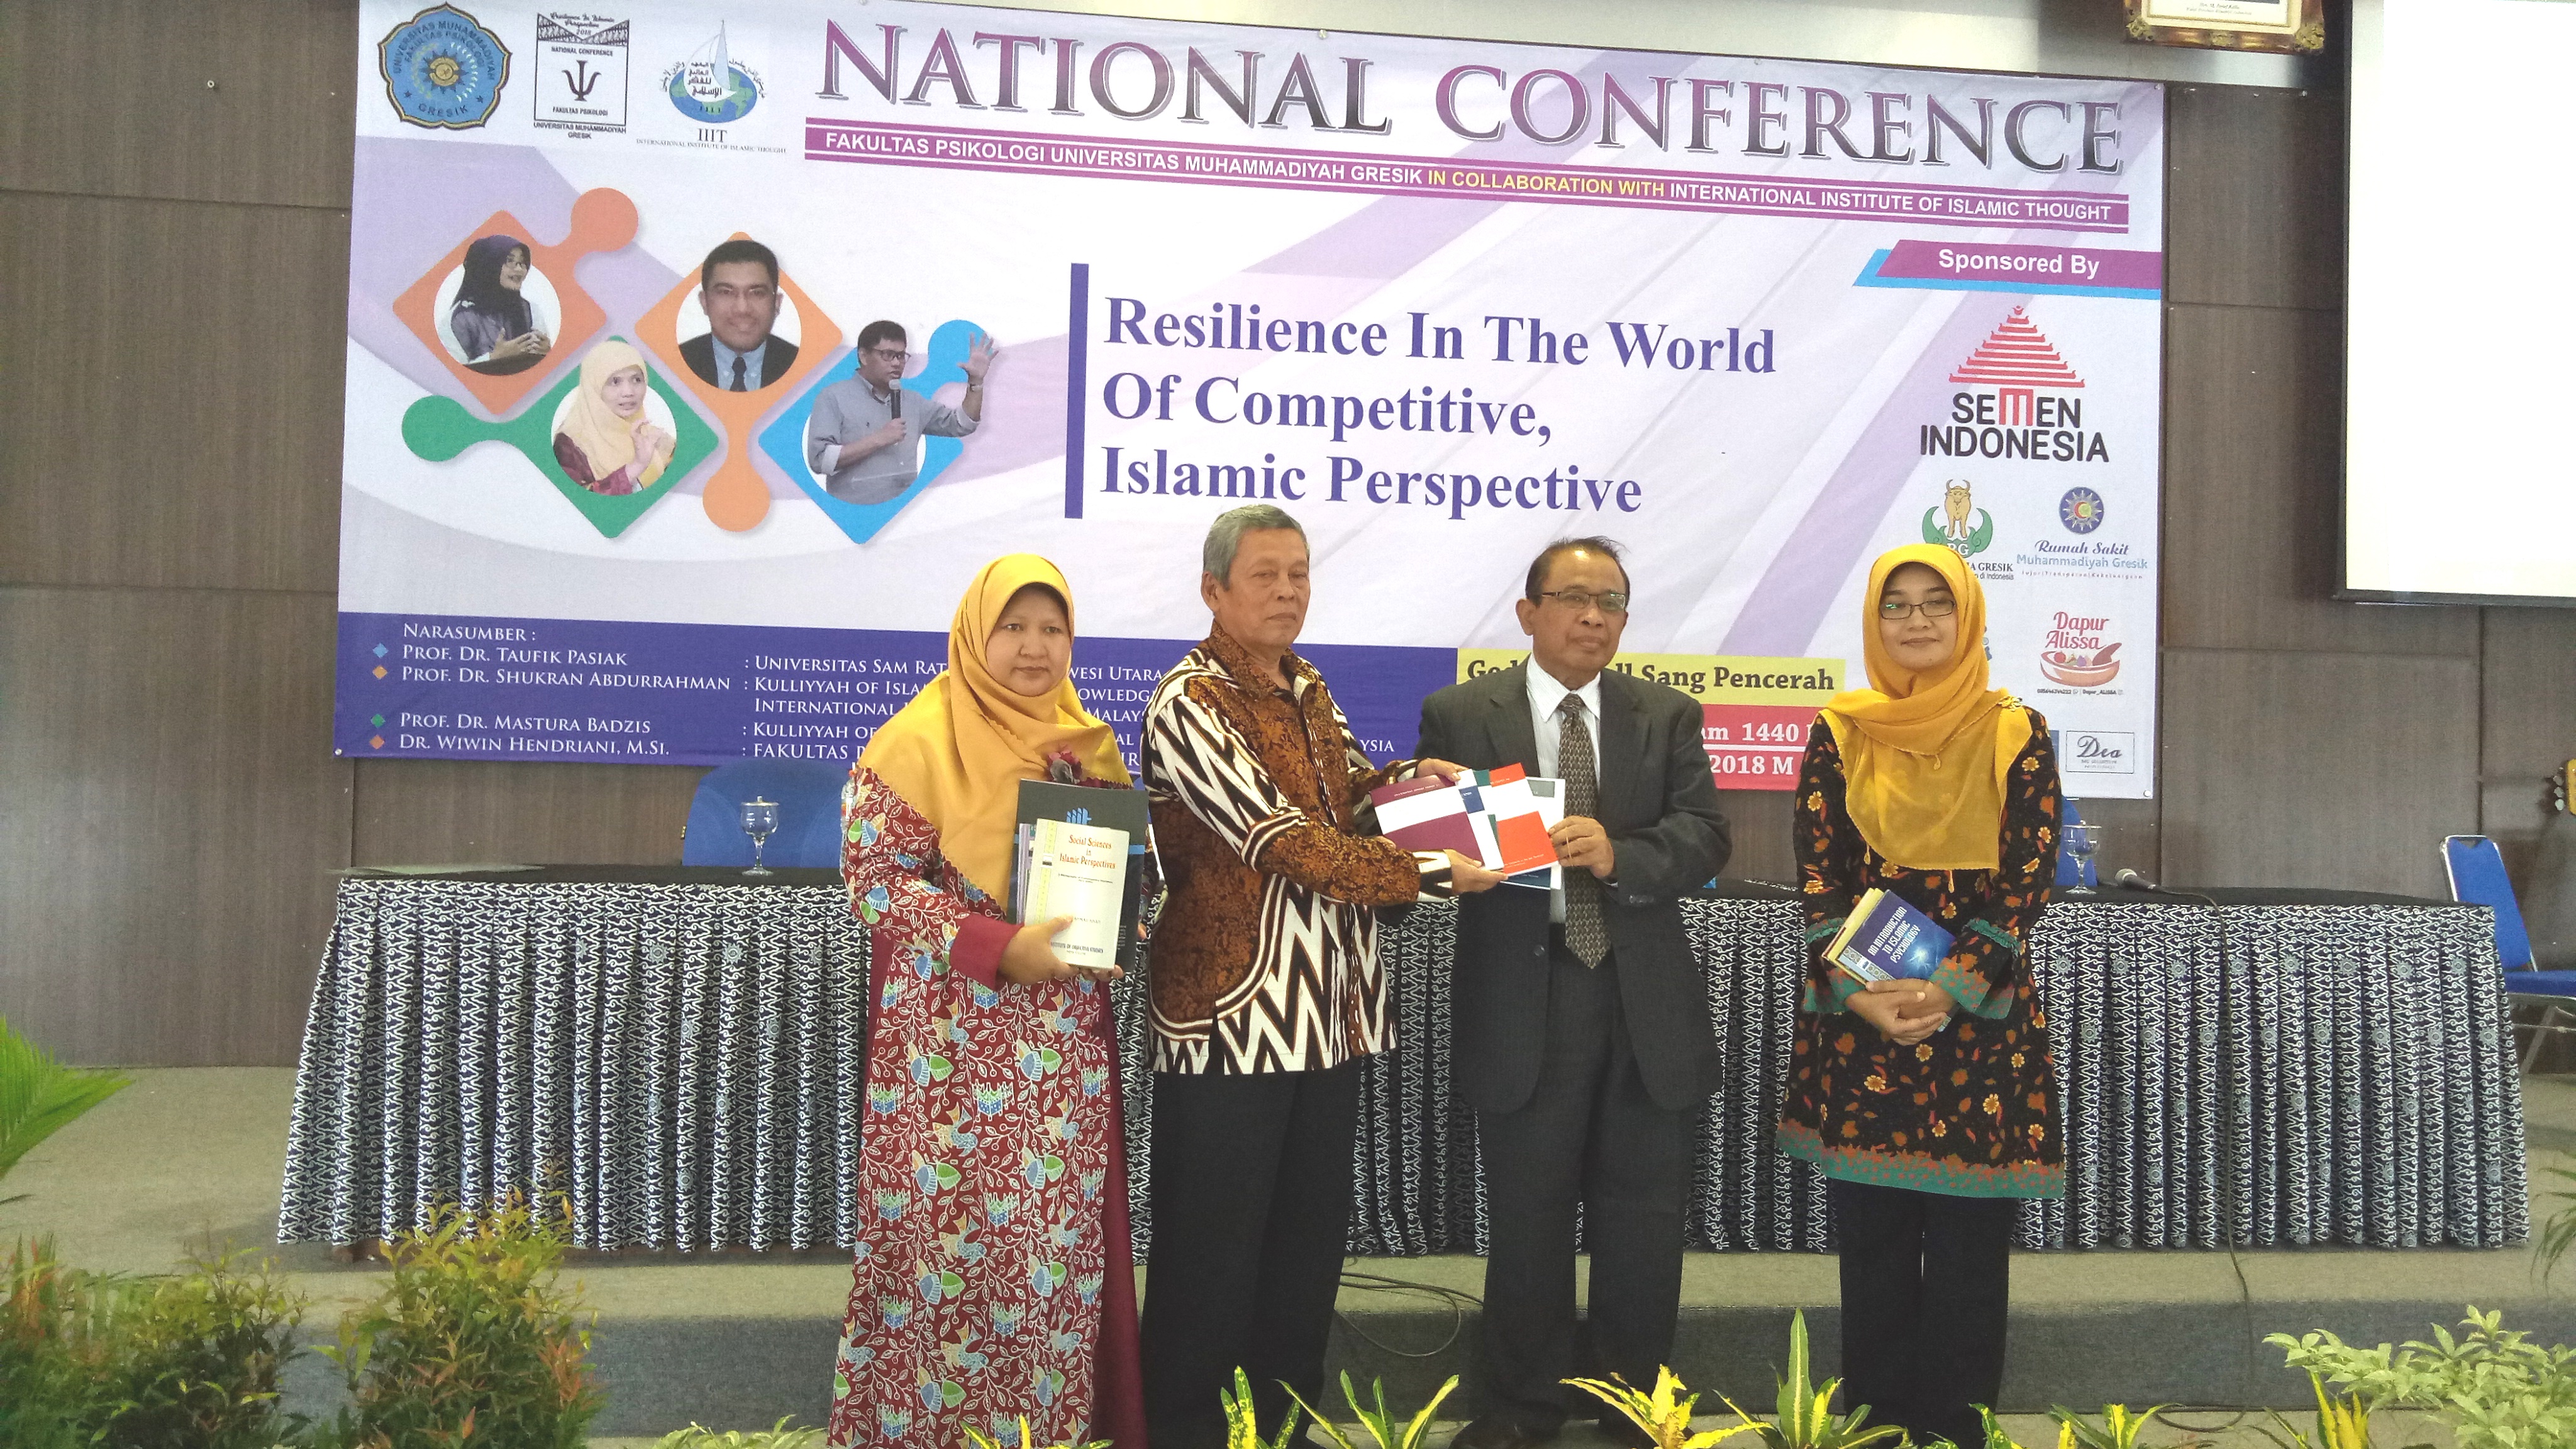 Resilience in the World of Competitive, Islamic Perspective